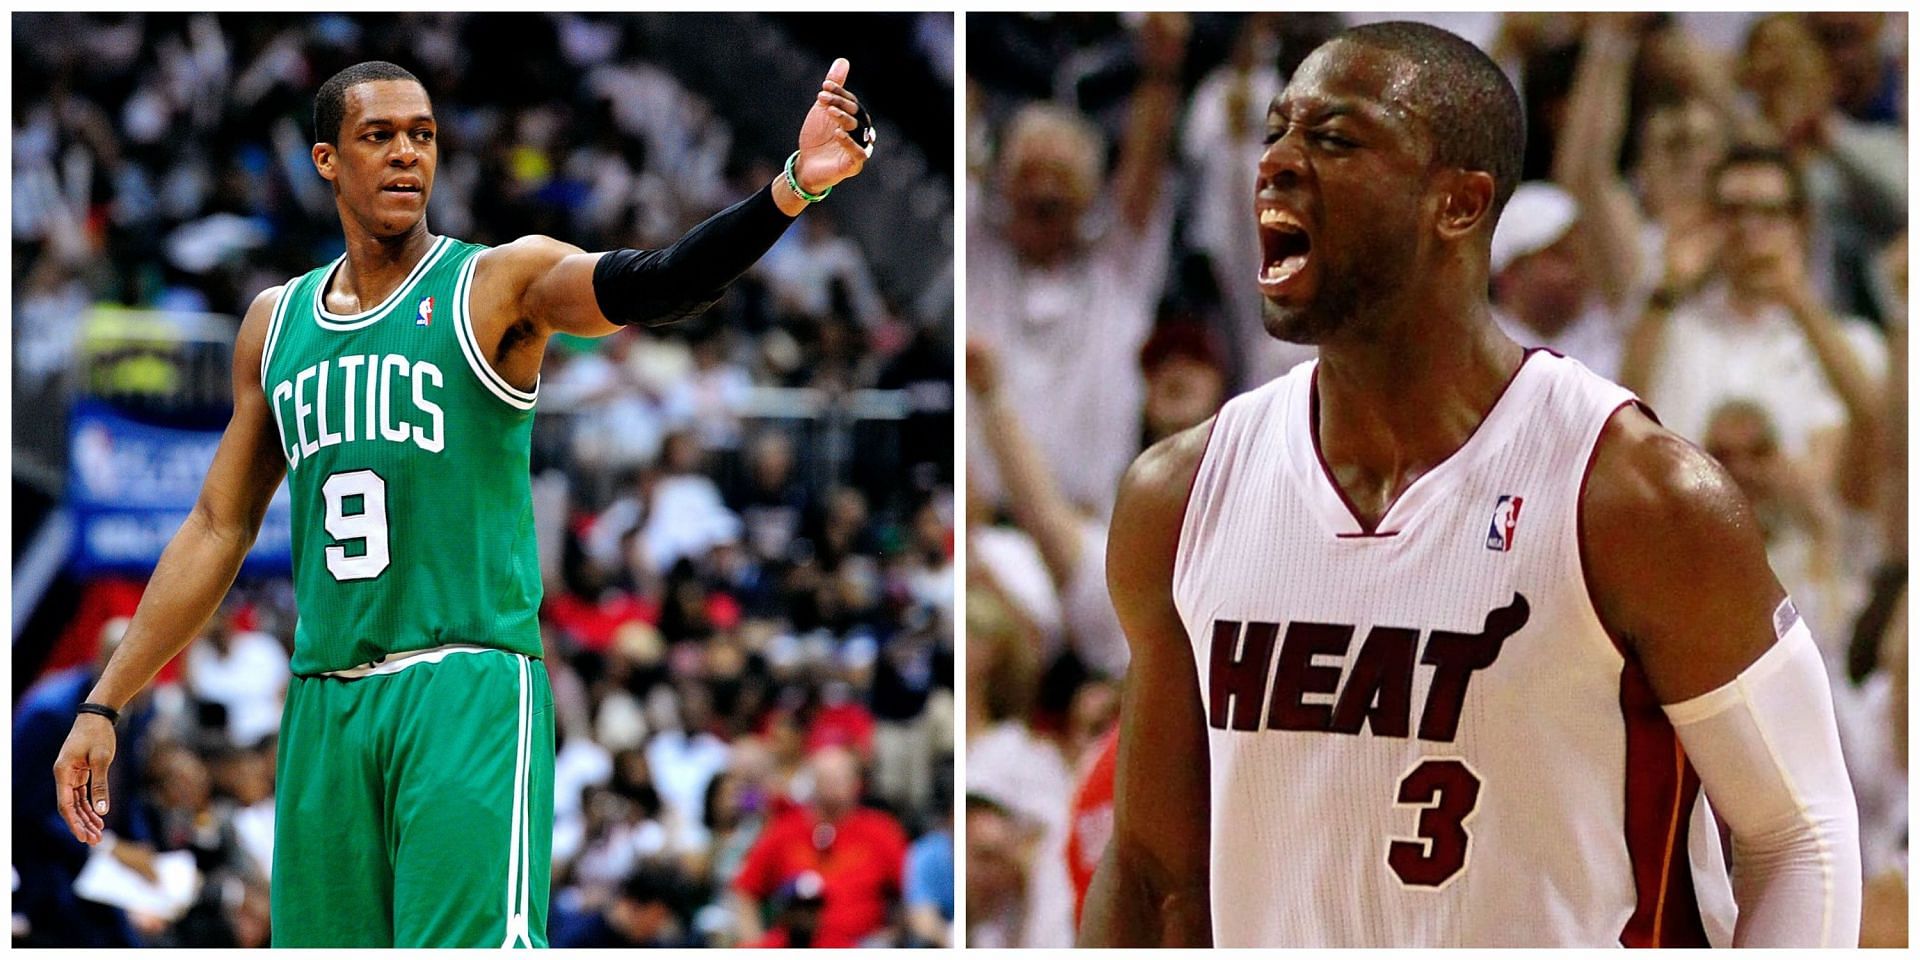 Rajon Rondo recounts decade-old playoff incident by claiming Dwyane Wade 